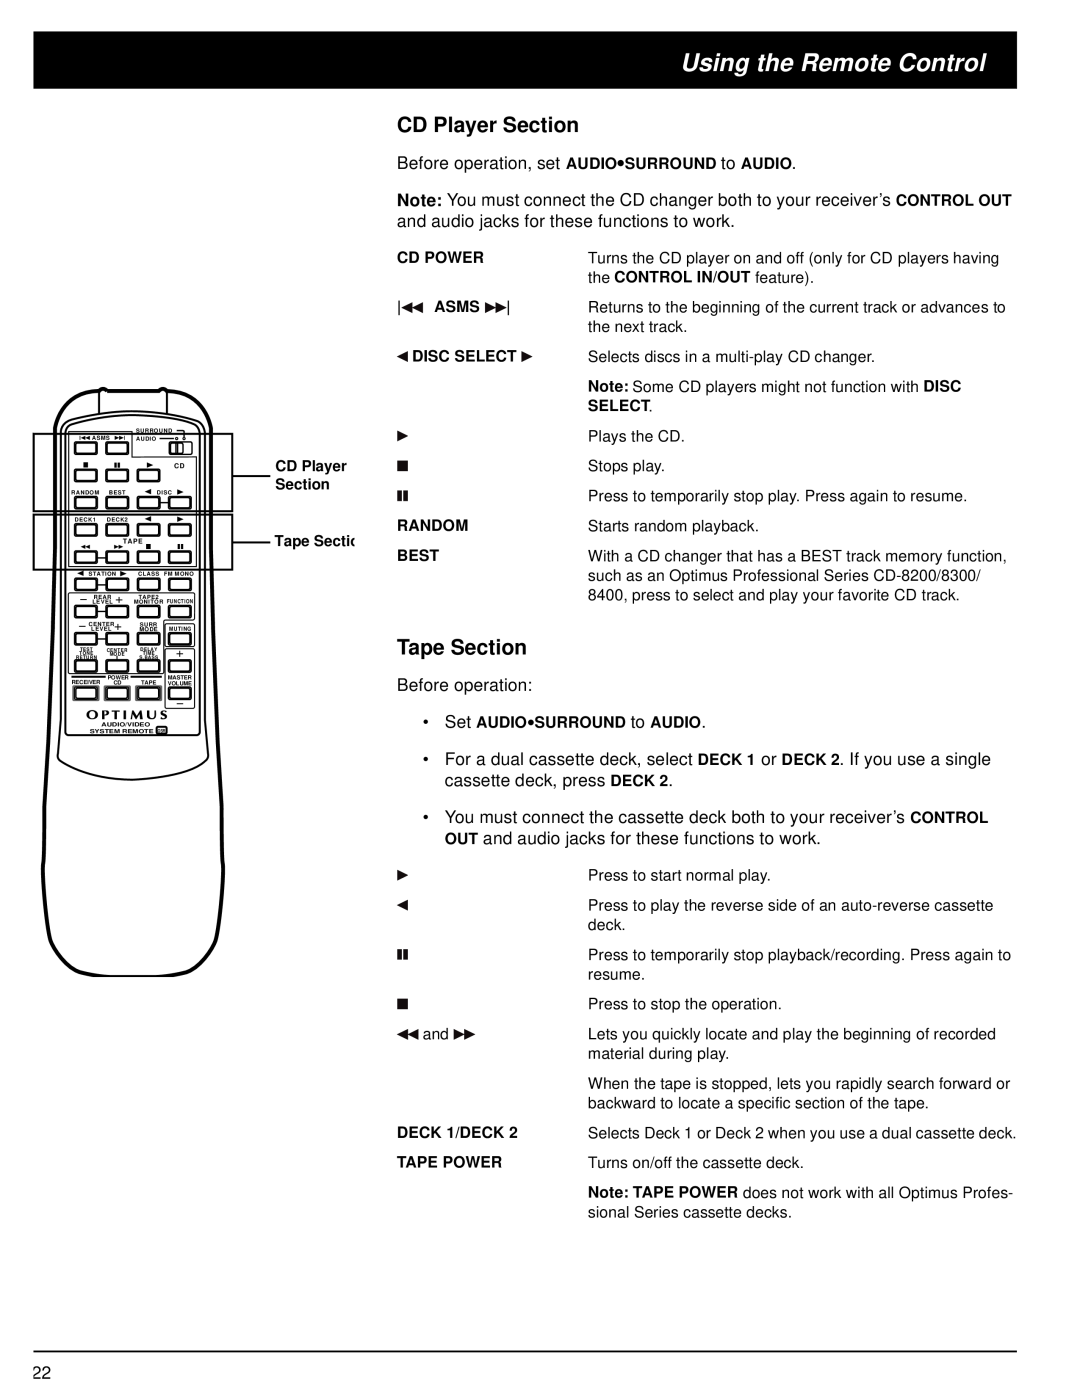 Optimus 31-3036, STAV-3570, STAV-3560, 31-3035 owner manual Using the Remote Control, CD Player Section, Tape Section 